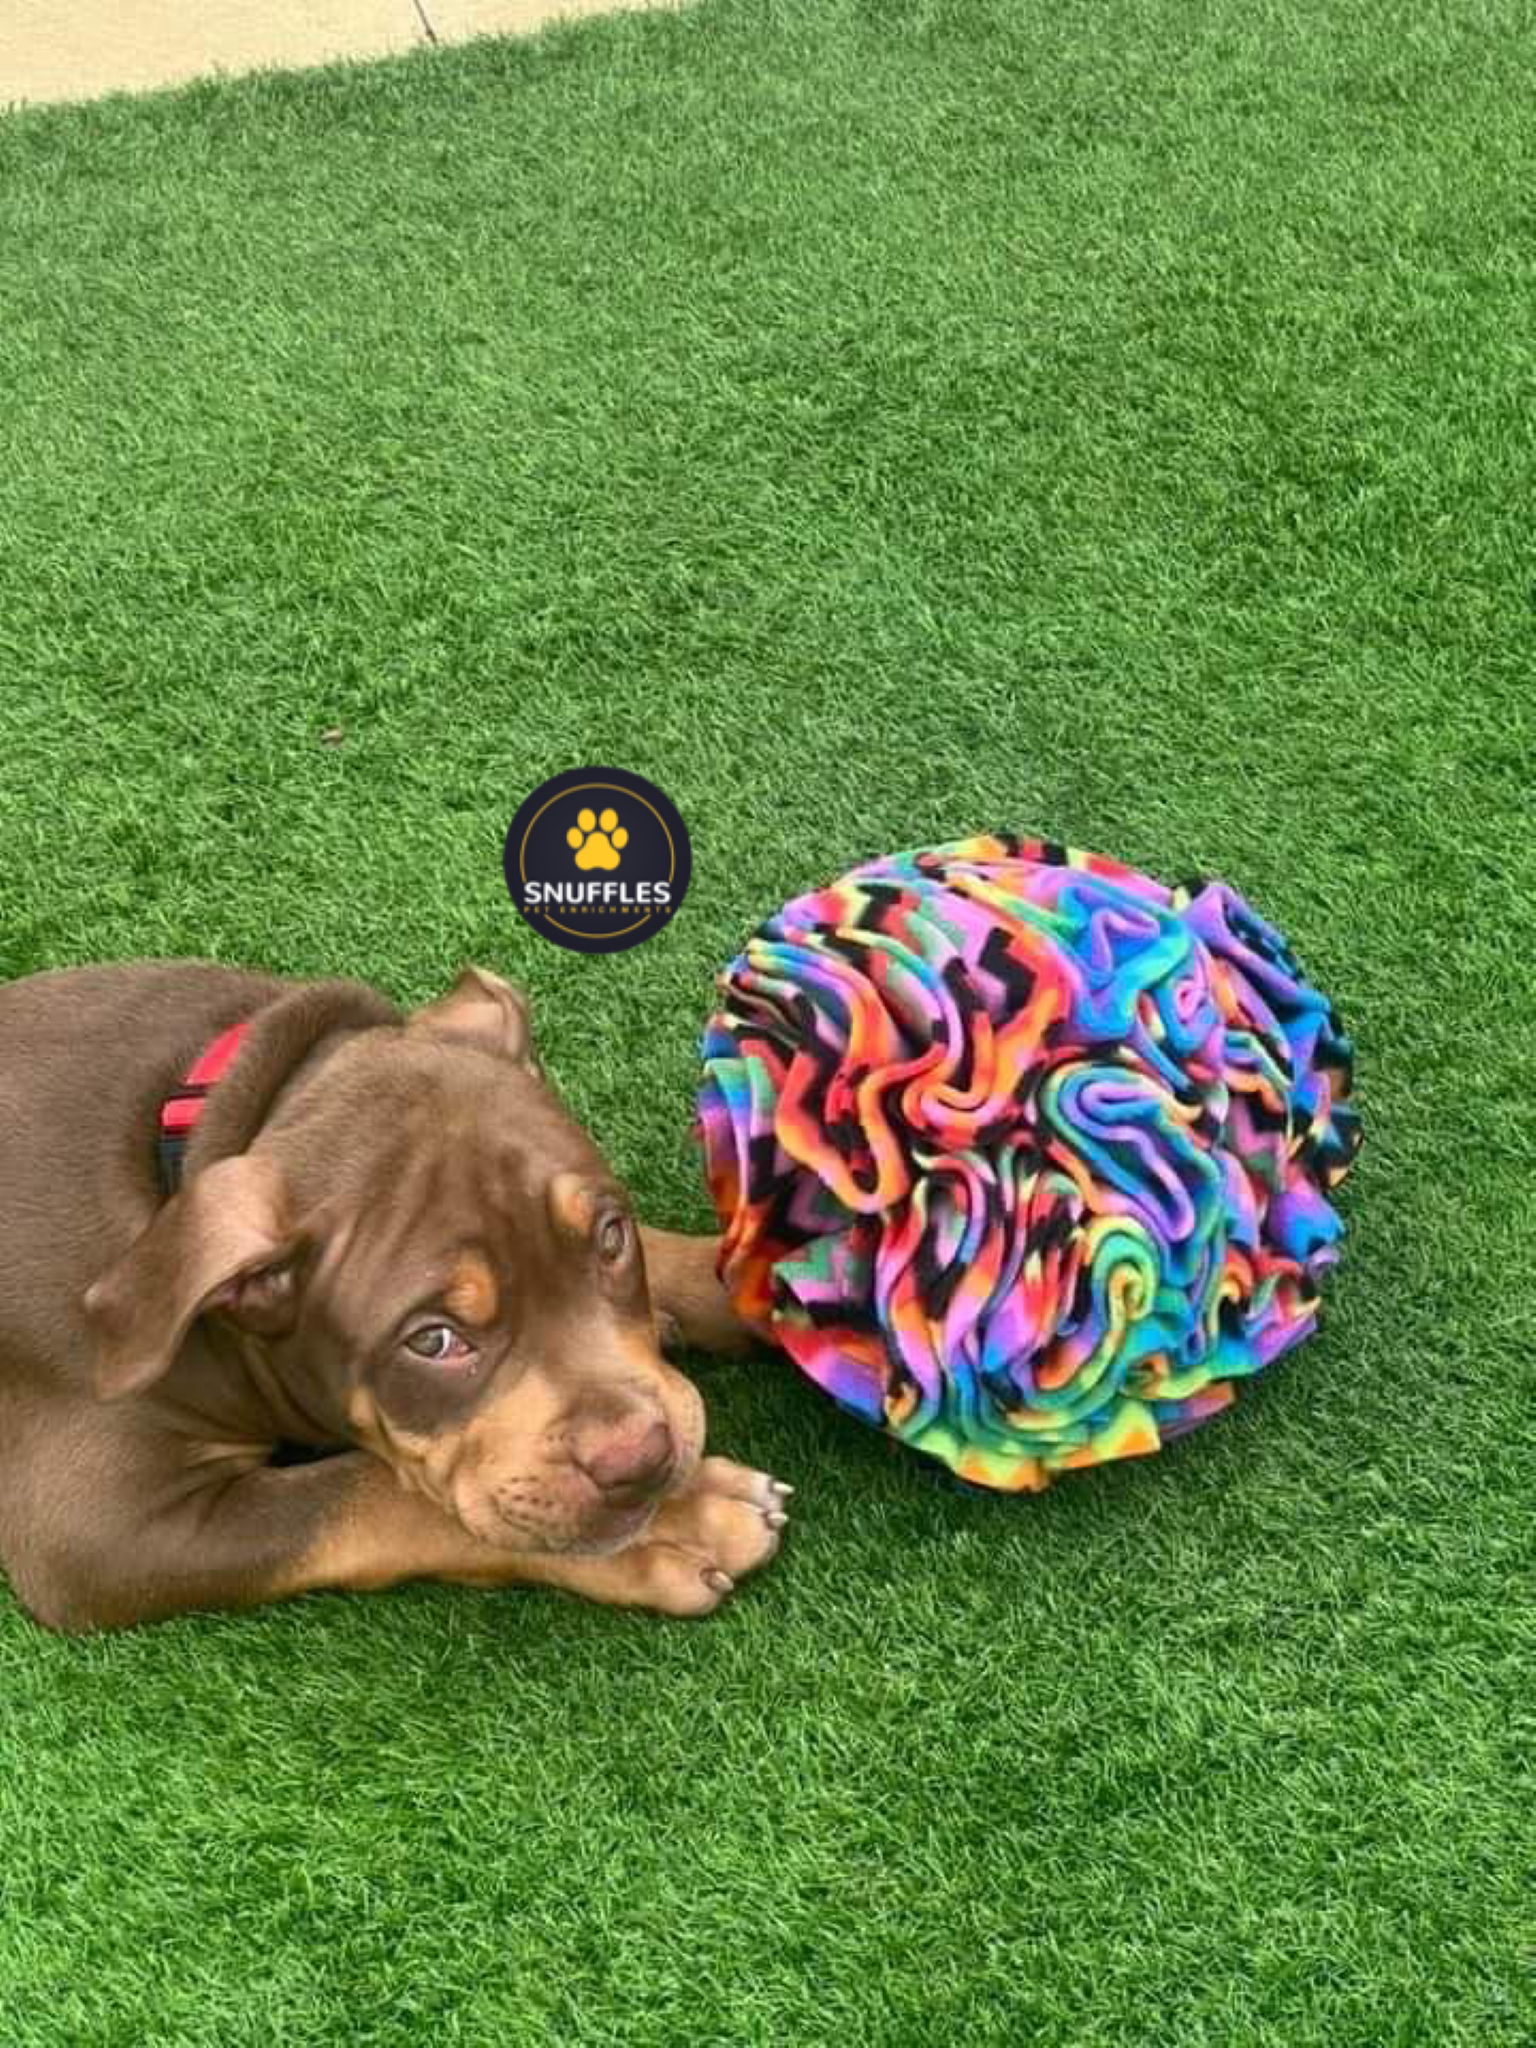 Large Snuffle Ball Fun Enrichment Dog Puzzle Learning & Scent Work Training  Slow Feeder for Medium and Large Dog Breeds dog Gifts 